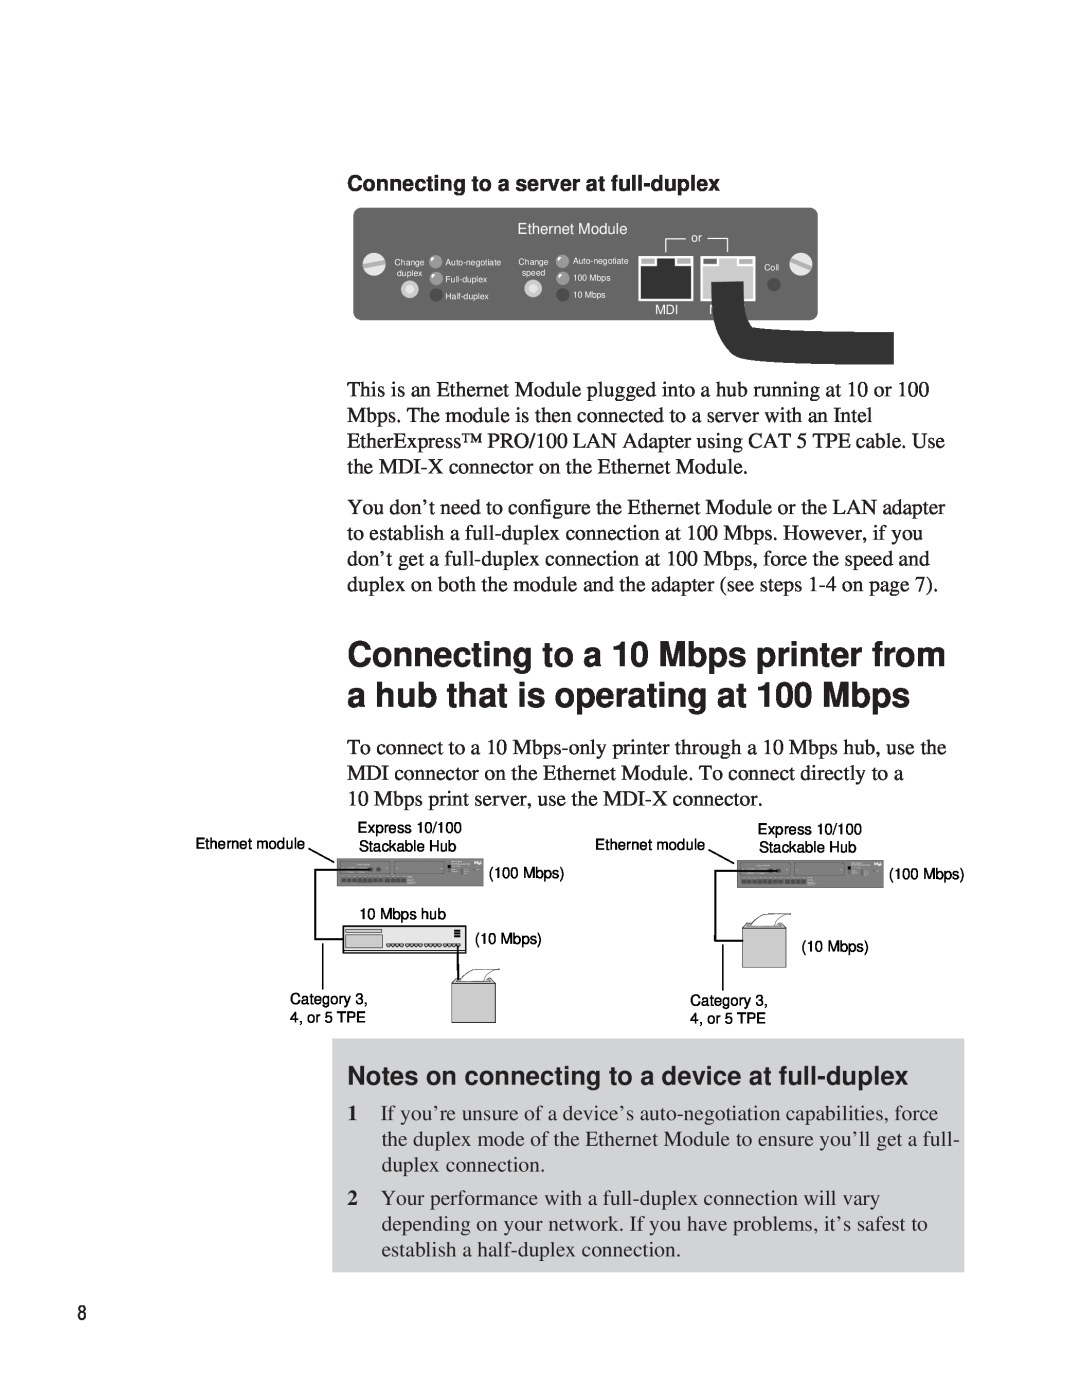 Intel EE110EM manual Notes on connecting to a device at full-duplex, Connecting to a server at full-duplex 